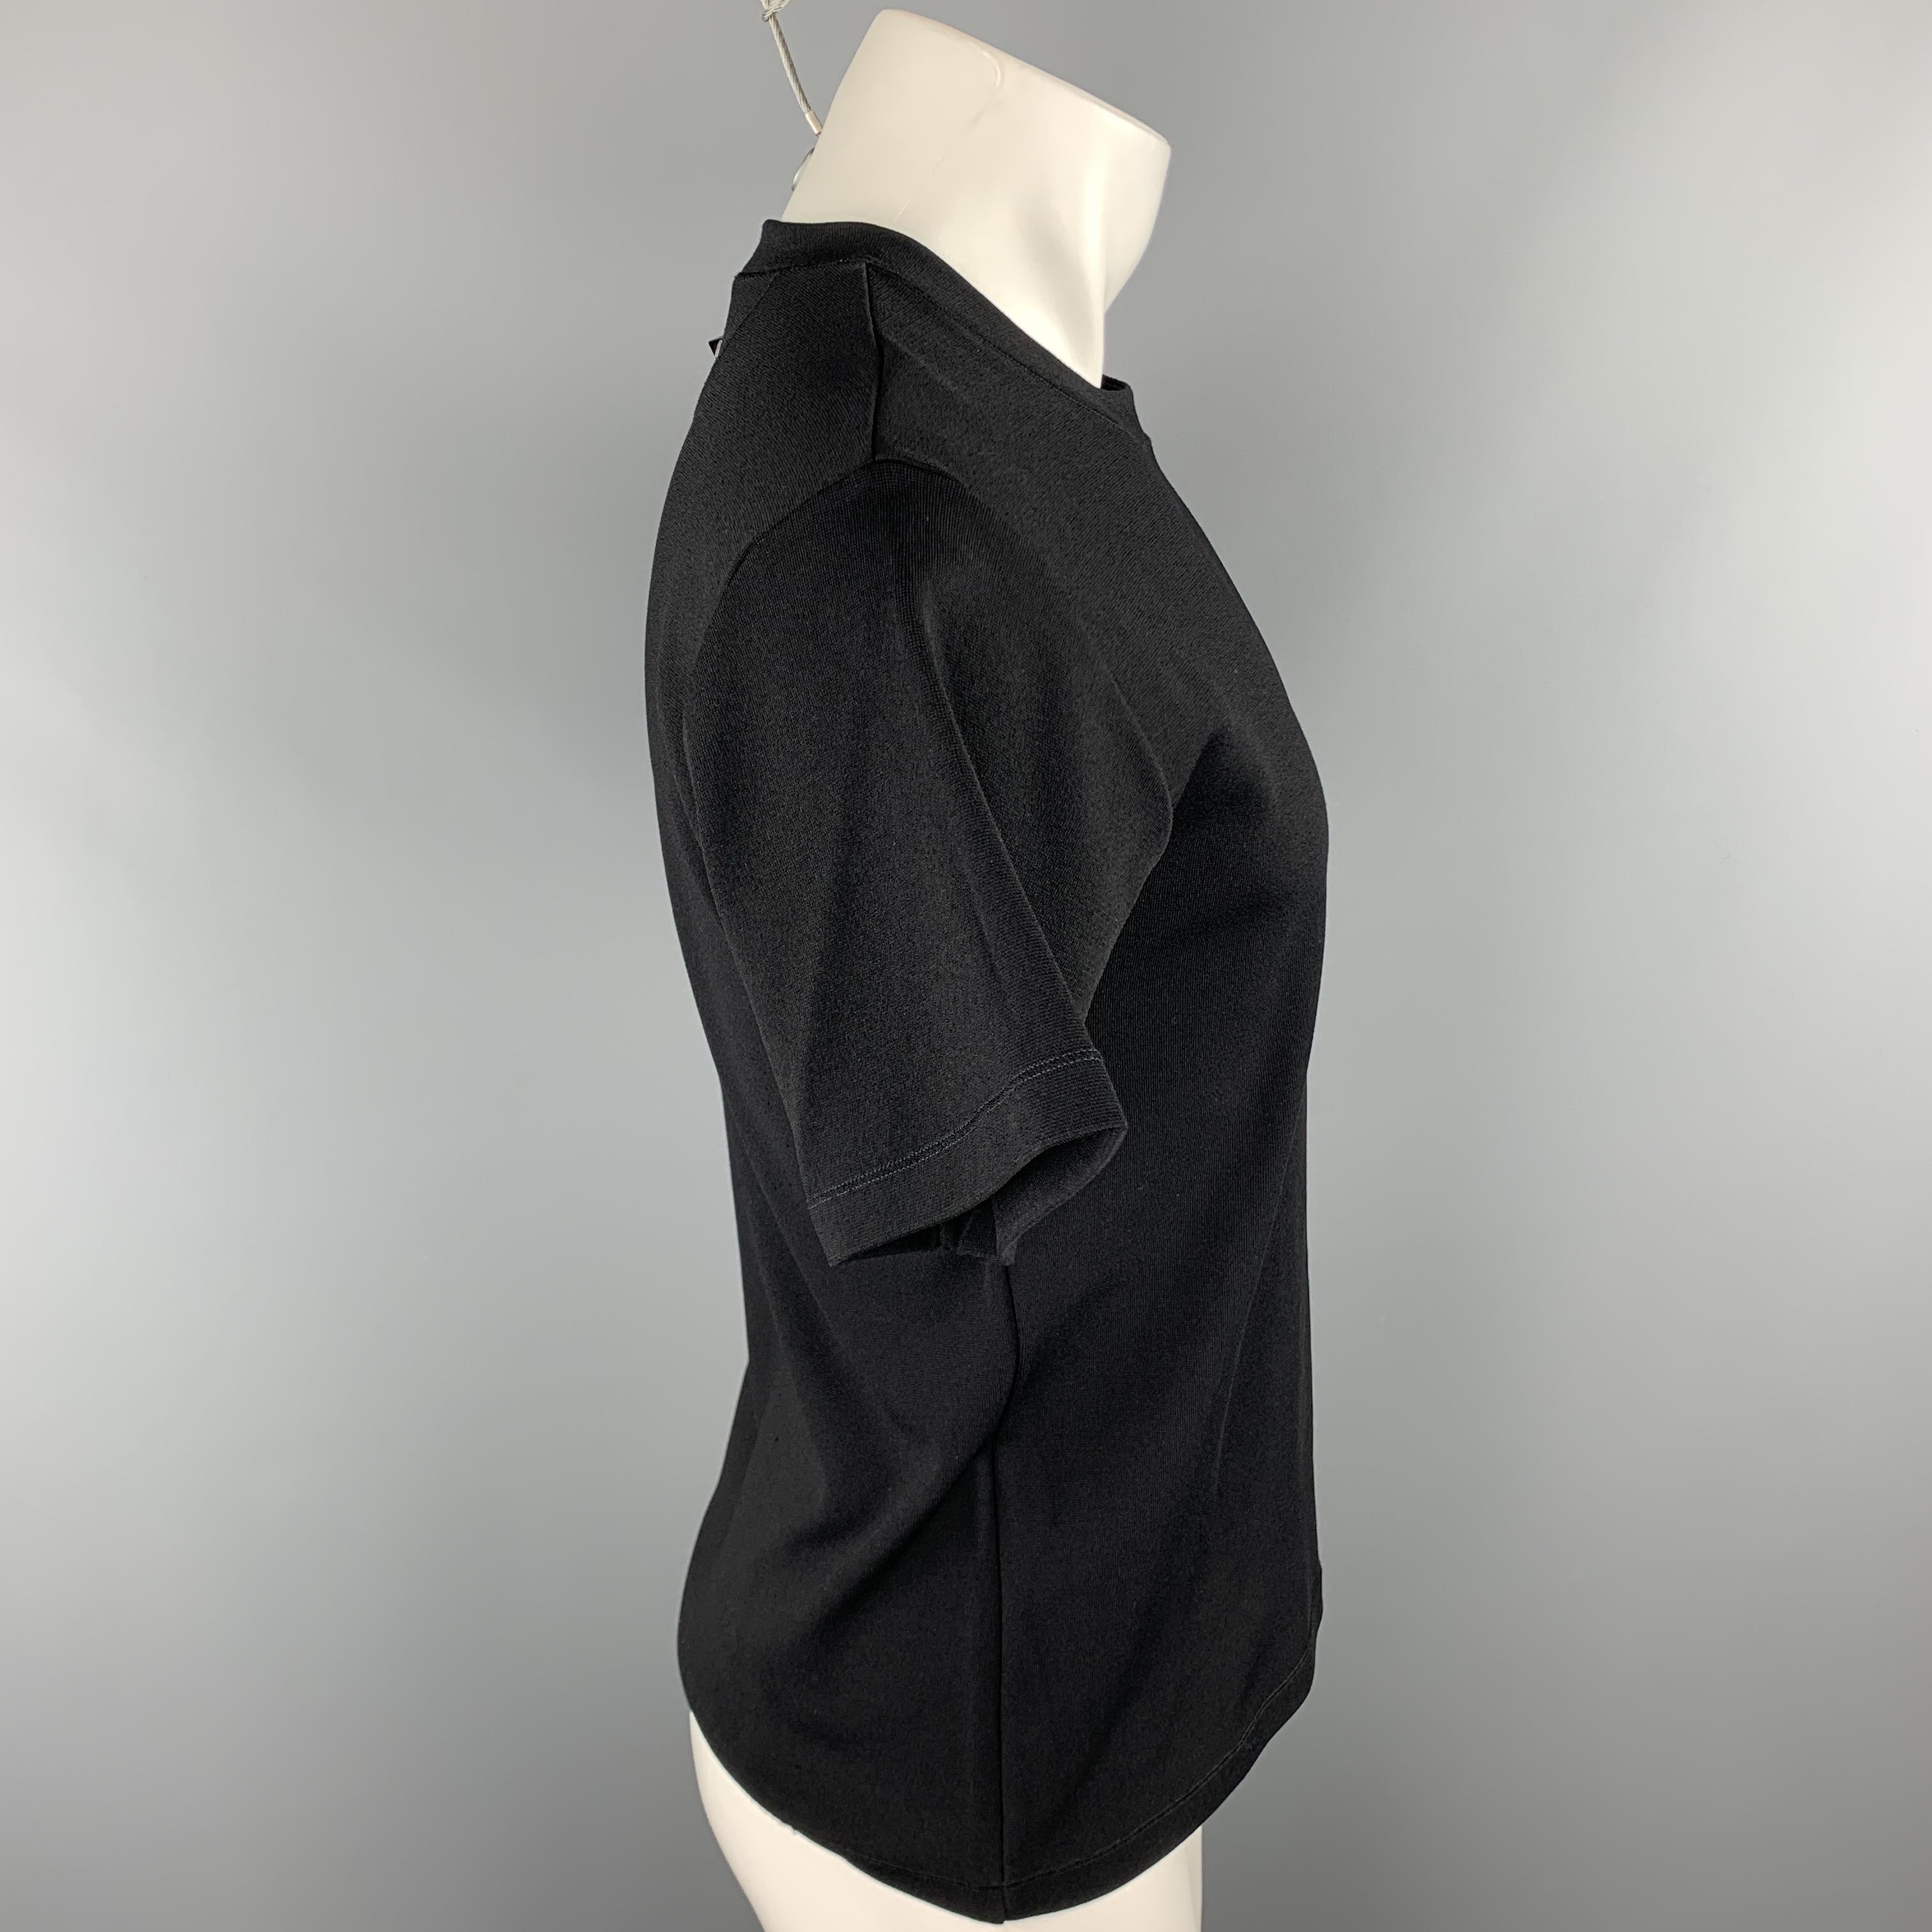 VALENTINO NOIR pullover comes in a black viscose blend featuring a back stud detail and a crew-neck. Made in Italy.

Excellent Pre-Owned Condition.
Marked: XS

Measurements:

Shoulder: 18 in.
Chest: 38 in. 
Sleeve: 9 in. 
Length: 24.5 in. 